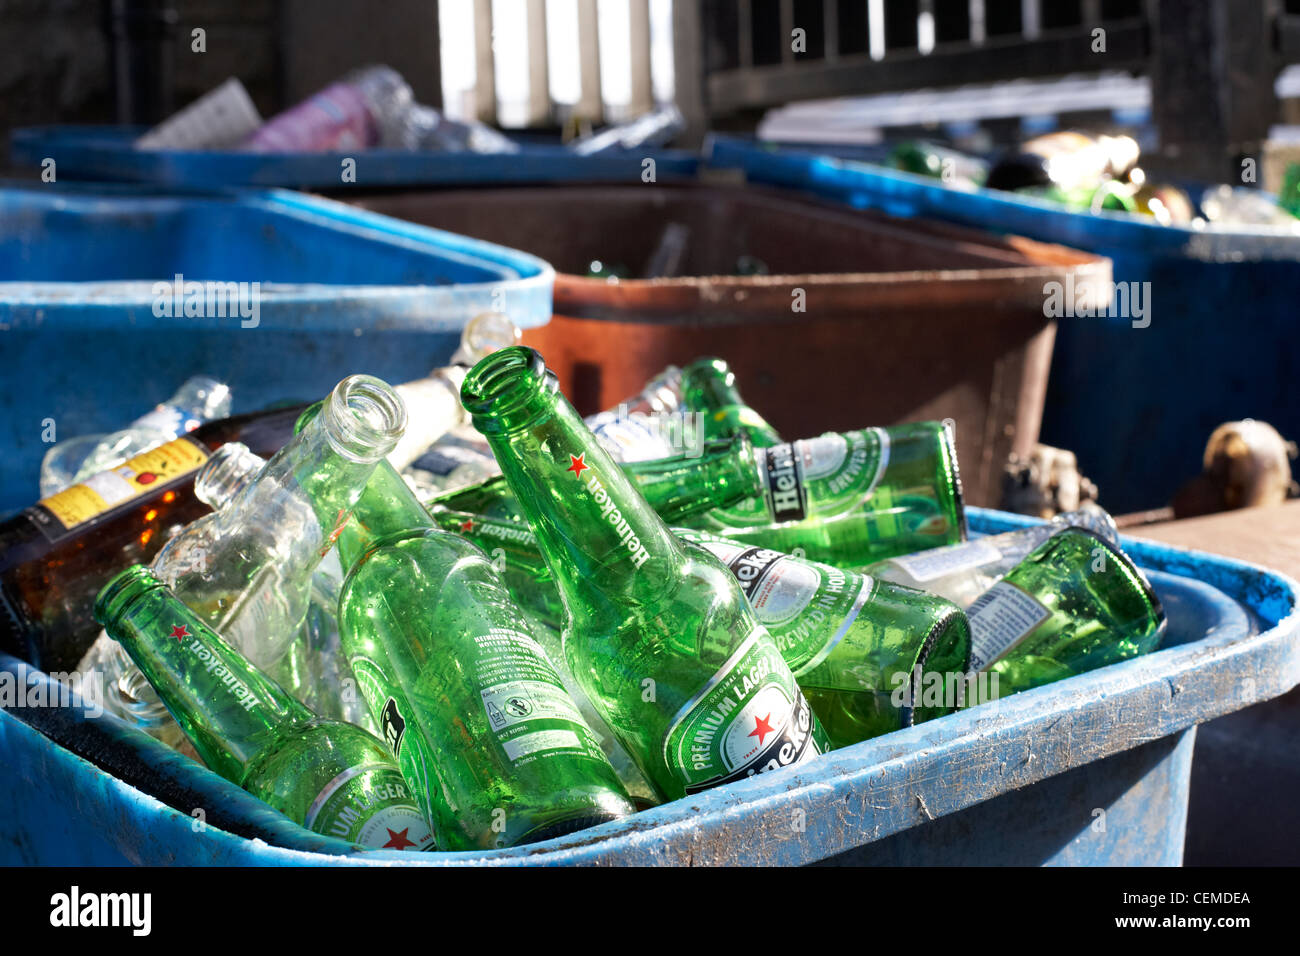 recycling bin full of empty beer bottles outside a pub or bar in the uk Stock Photo